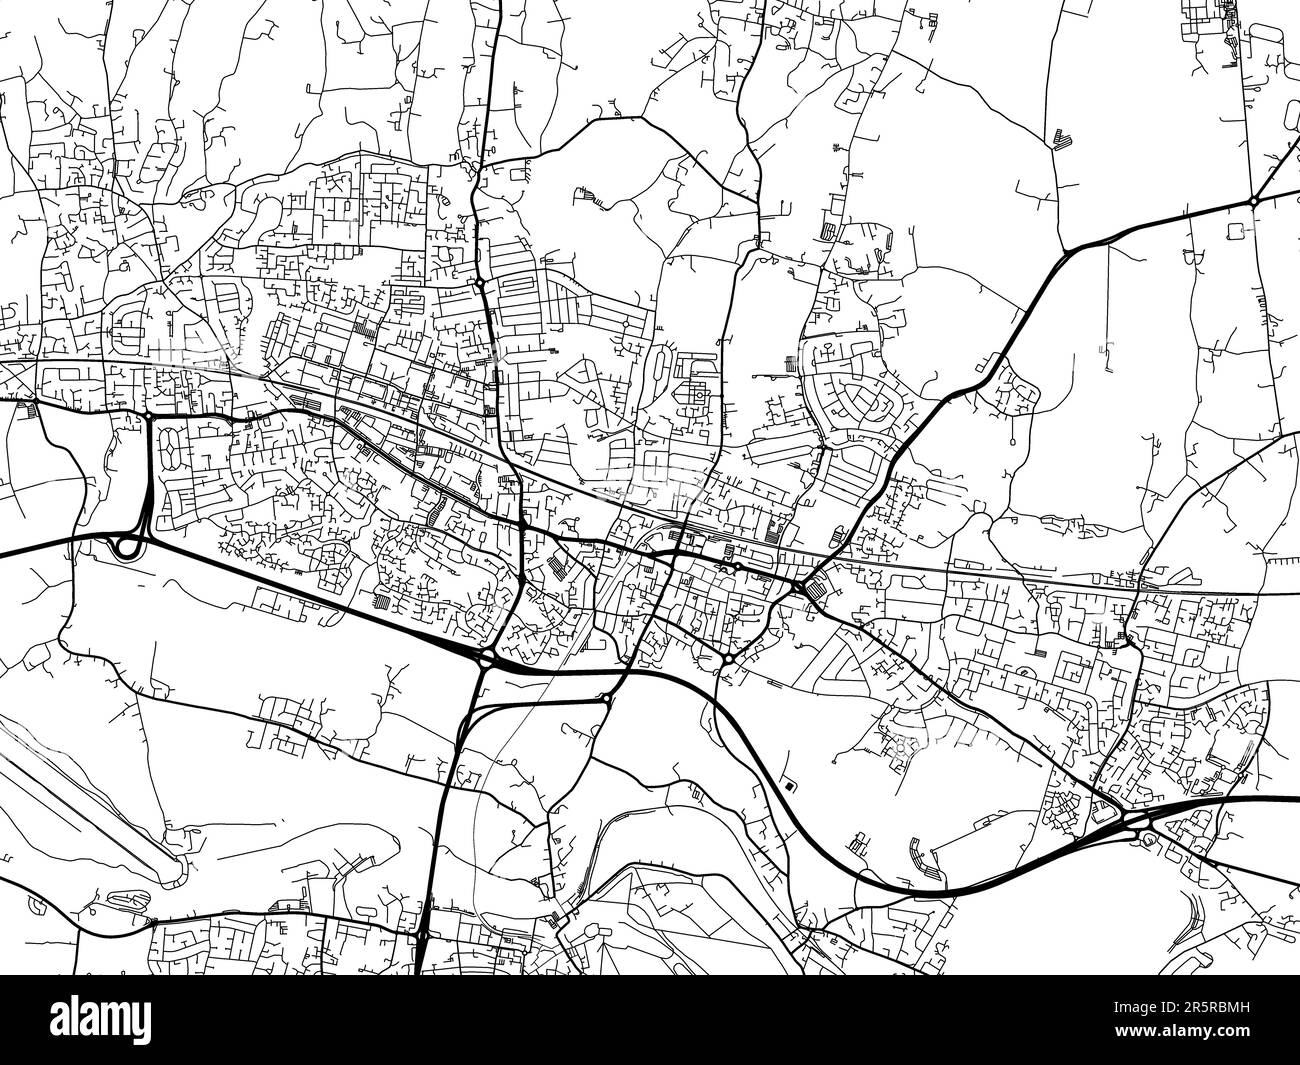 Road map of the city of  Slough in the United Kingdom on a white background. Stock Photo